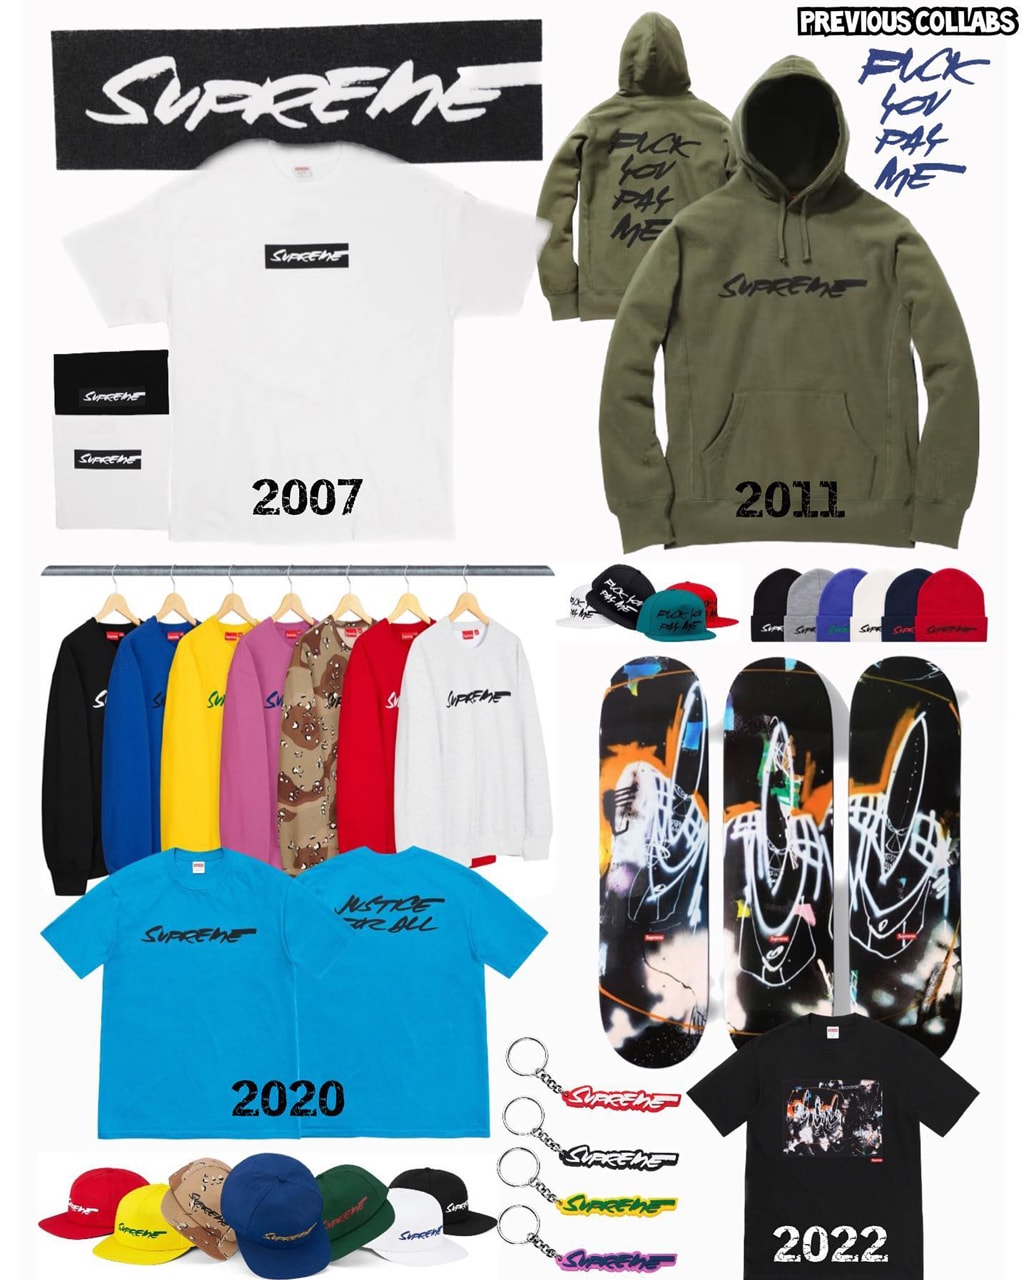 futura 2000 artist supreme new york collection rumor ss24 spring summer box logo t shirt official release date info photos price store list buying guide